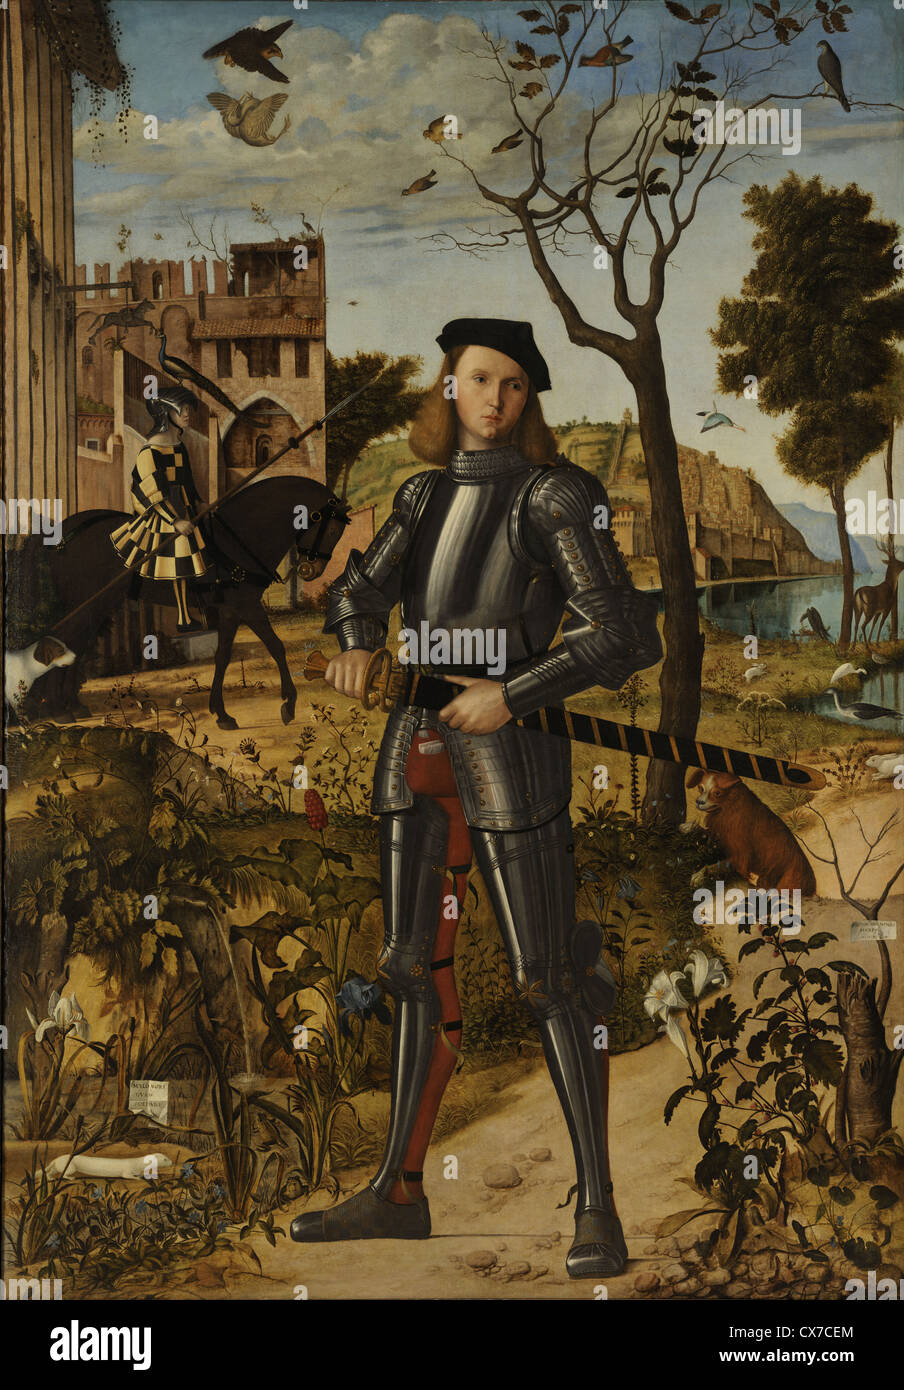 Young Knight in a Landscape by Vittore Carpaccio, circa 1510 - Very high quality and resolution image Stock Photo